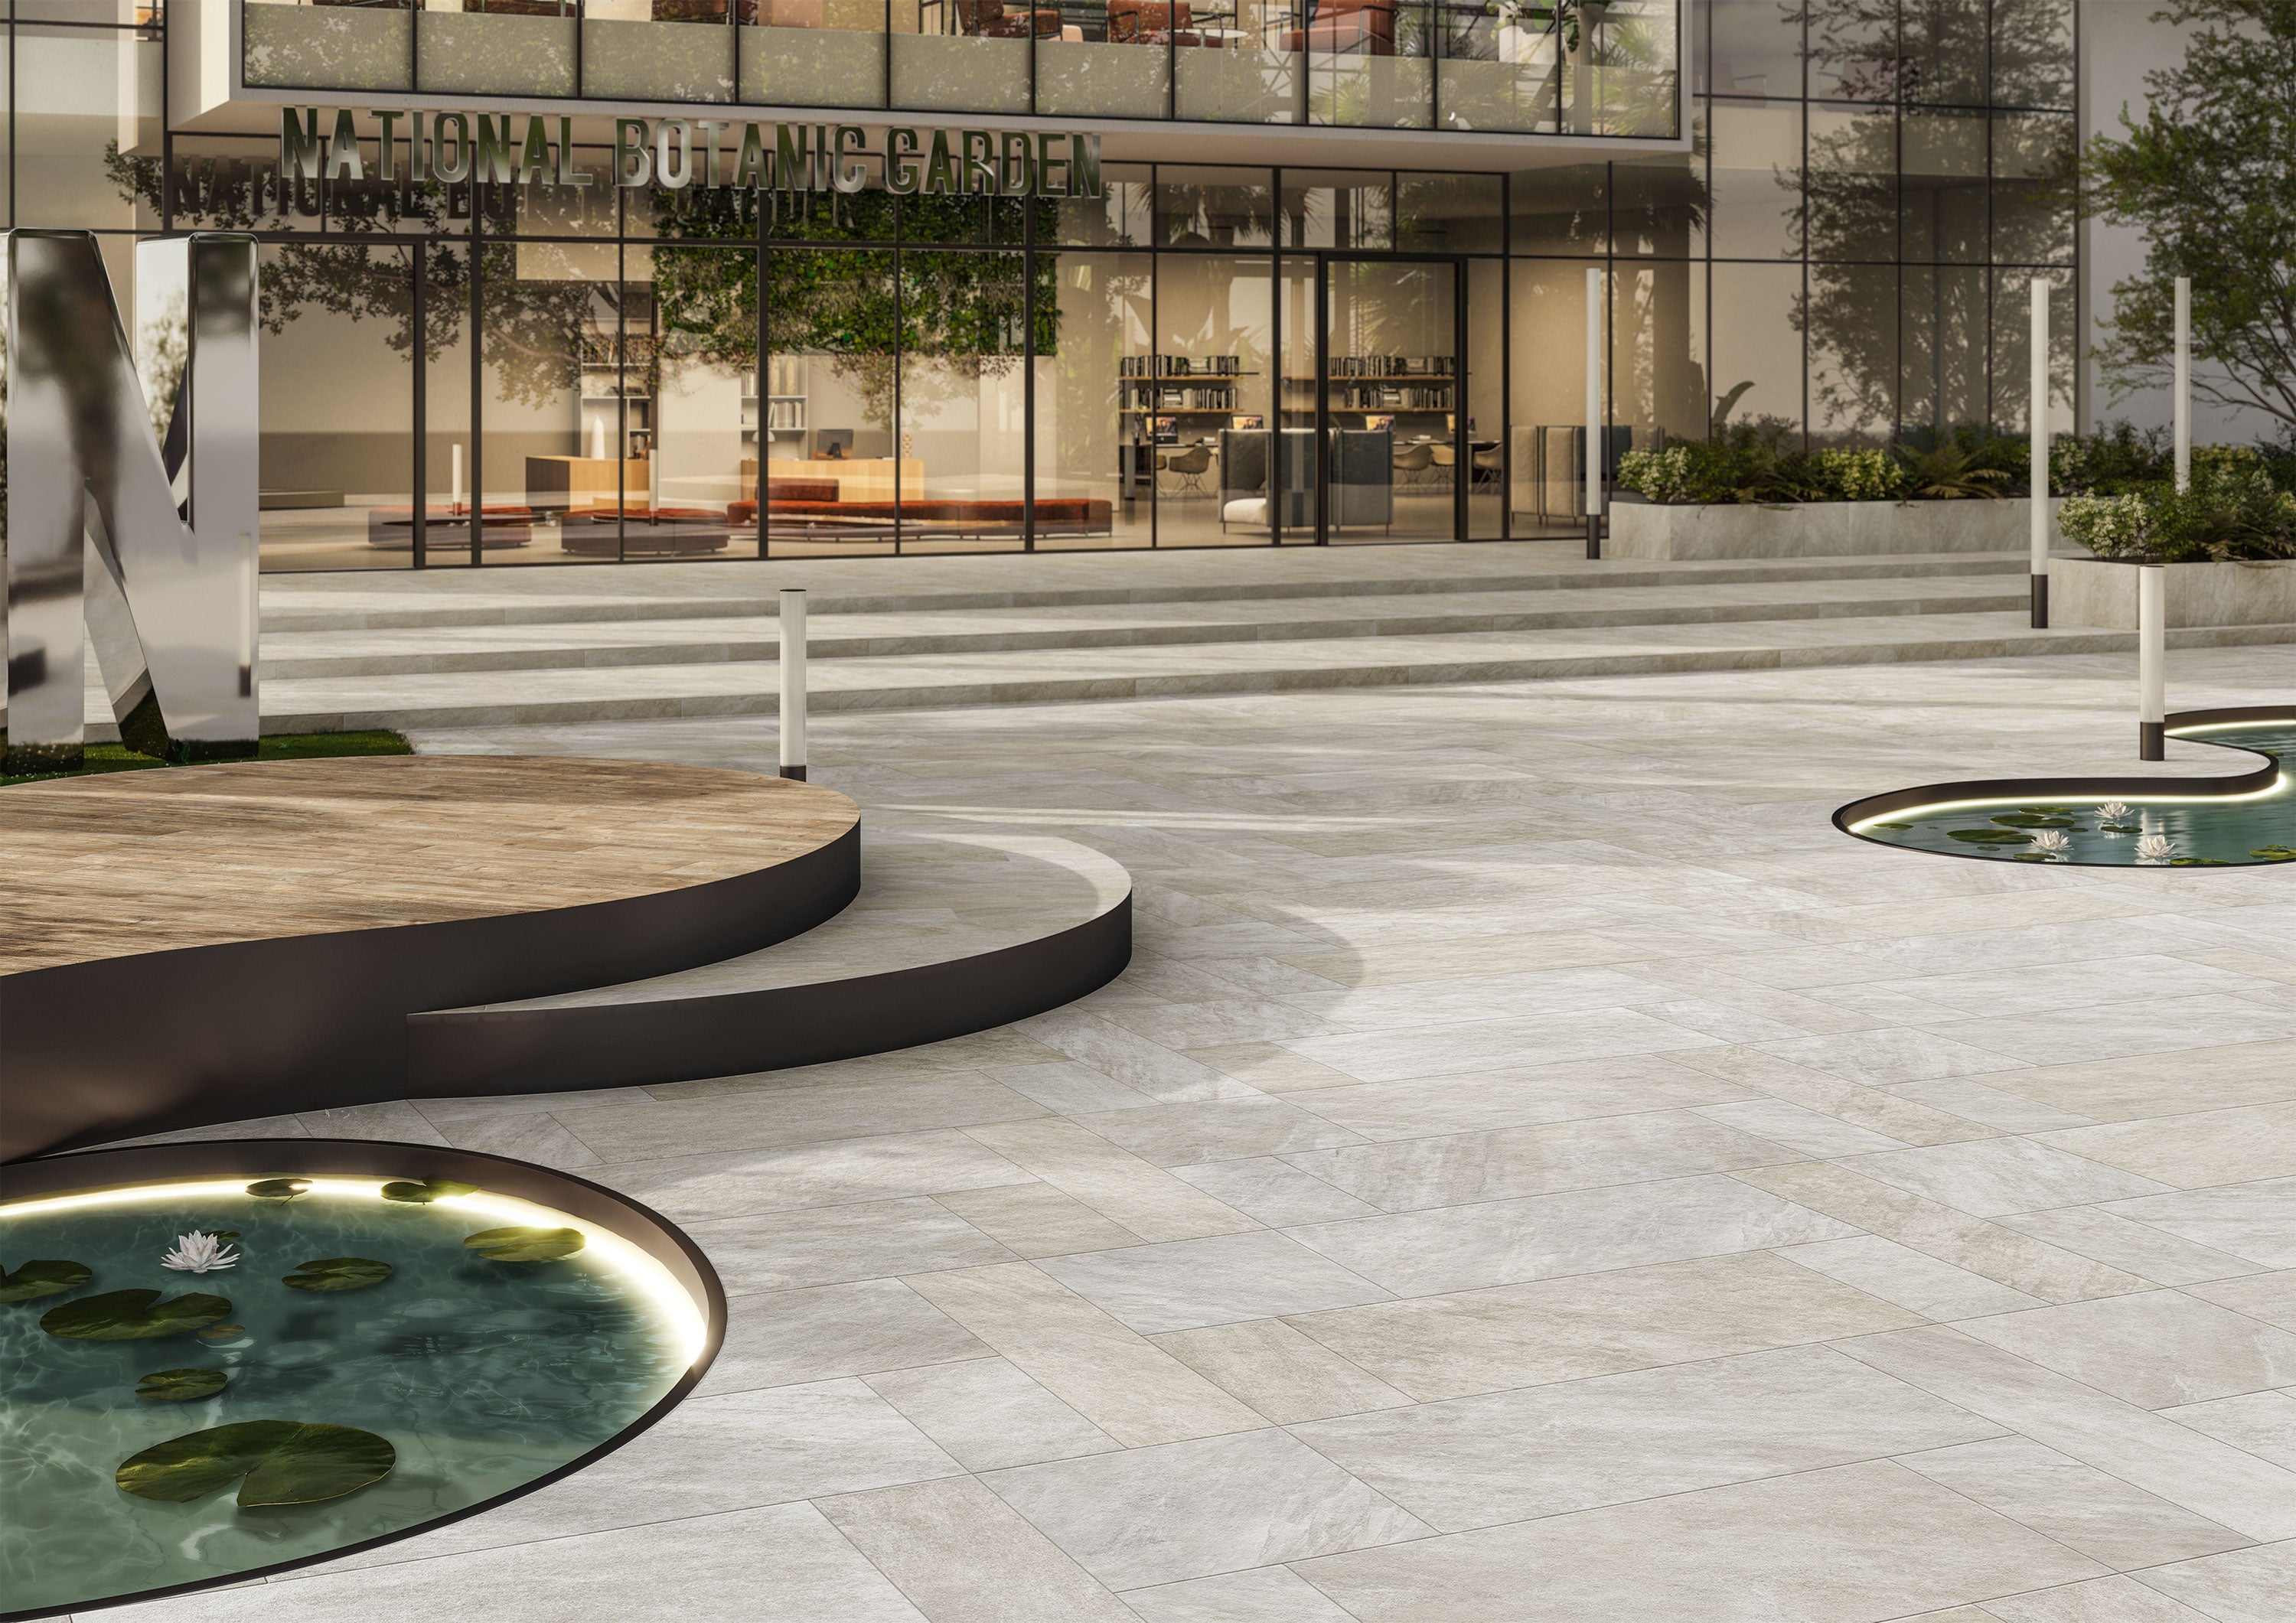 Porcelain tile collection with wood and stone textures by Surface Group displayed in a modern outdoor setting